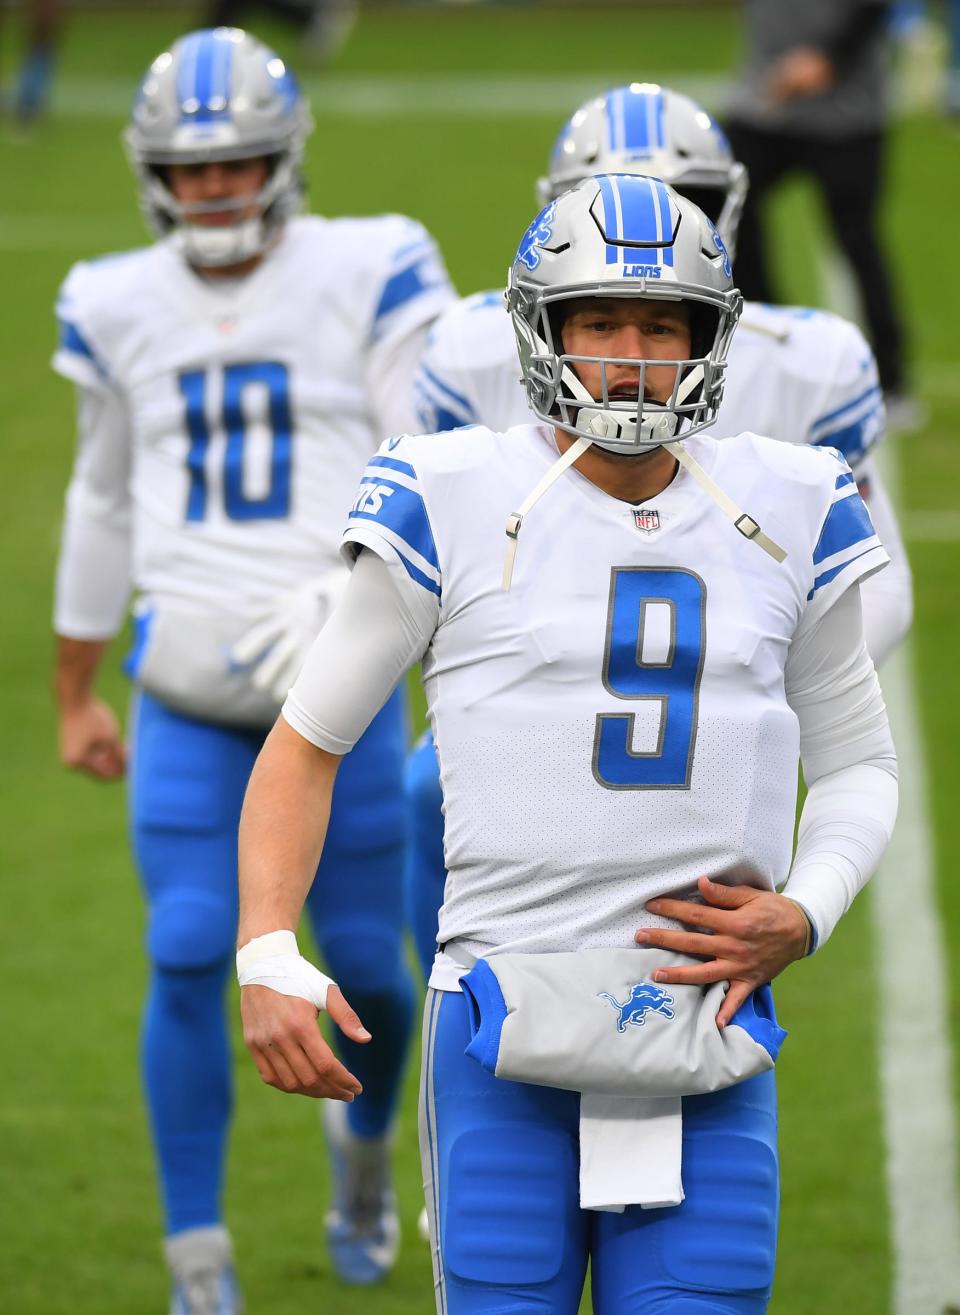 Lions quarterback Matthew Stafford warms up prior to the game against the Titans on Sunday, Dec. 20, 2020, in Nashville, Tenn.